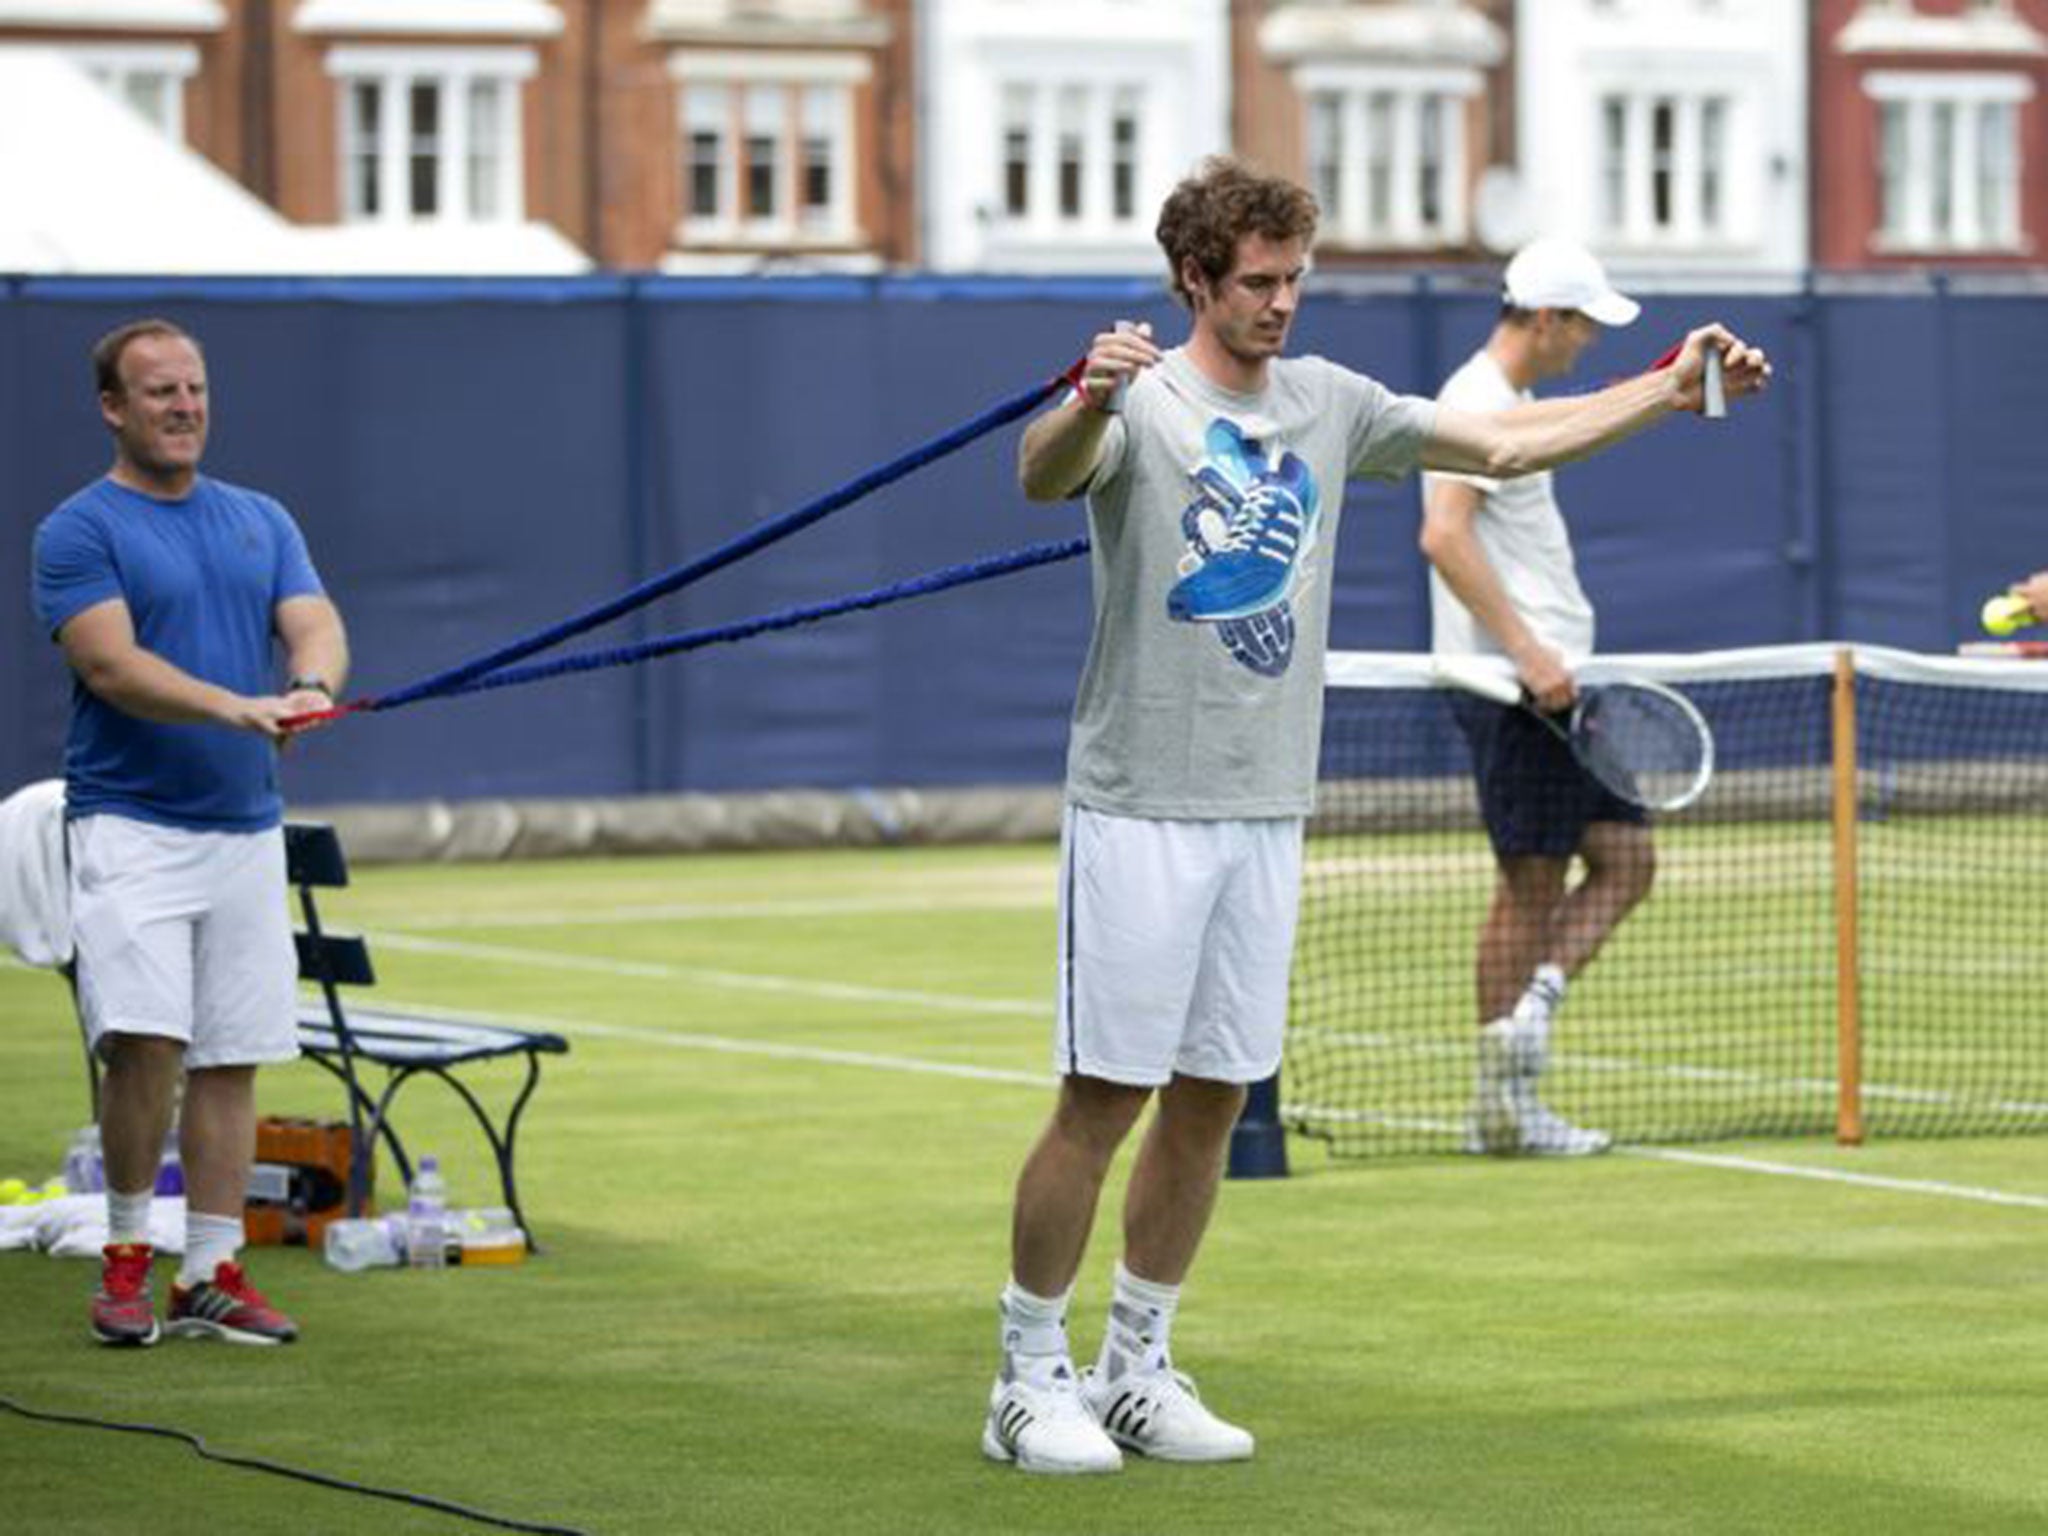 Andy Murray warms up for the grass-court season with some stretches at Queen’s yesterday